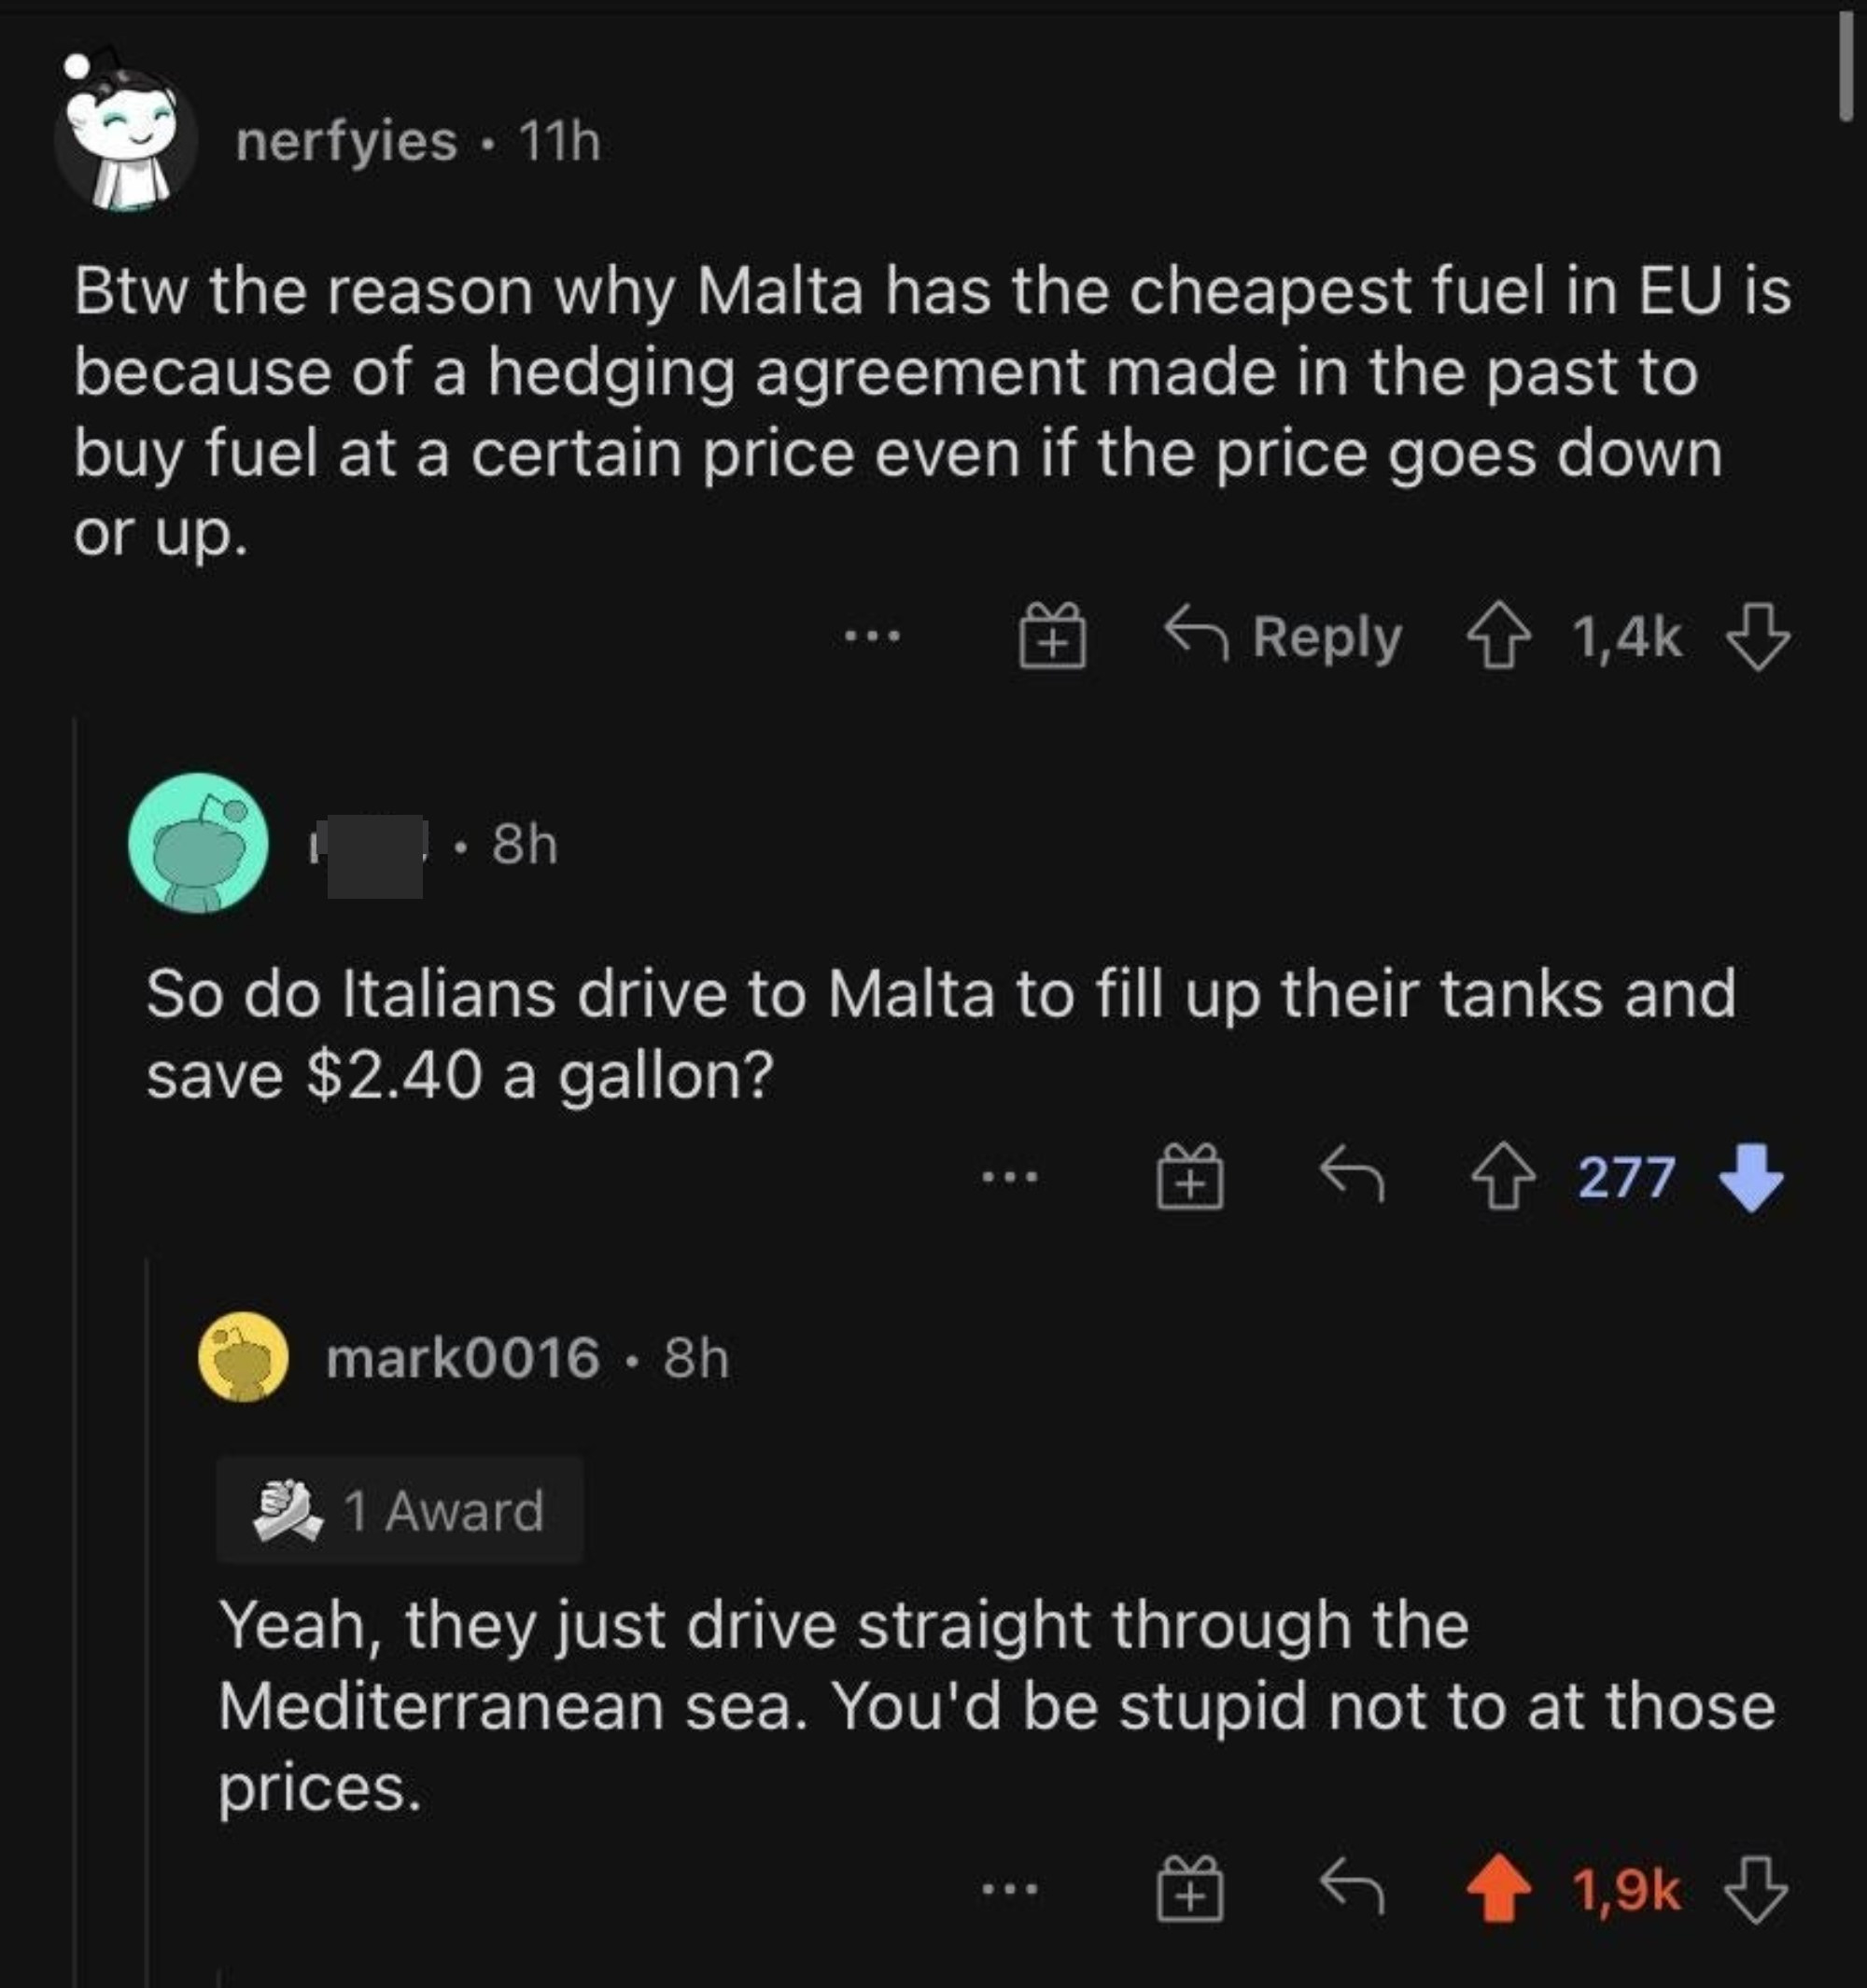 Person who asks if Italians drive to Malta, an archipelago, to get gas